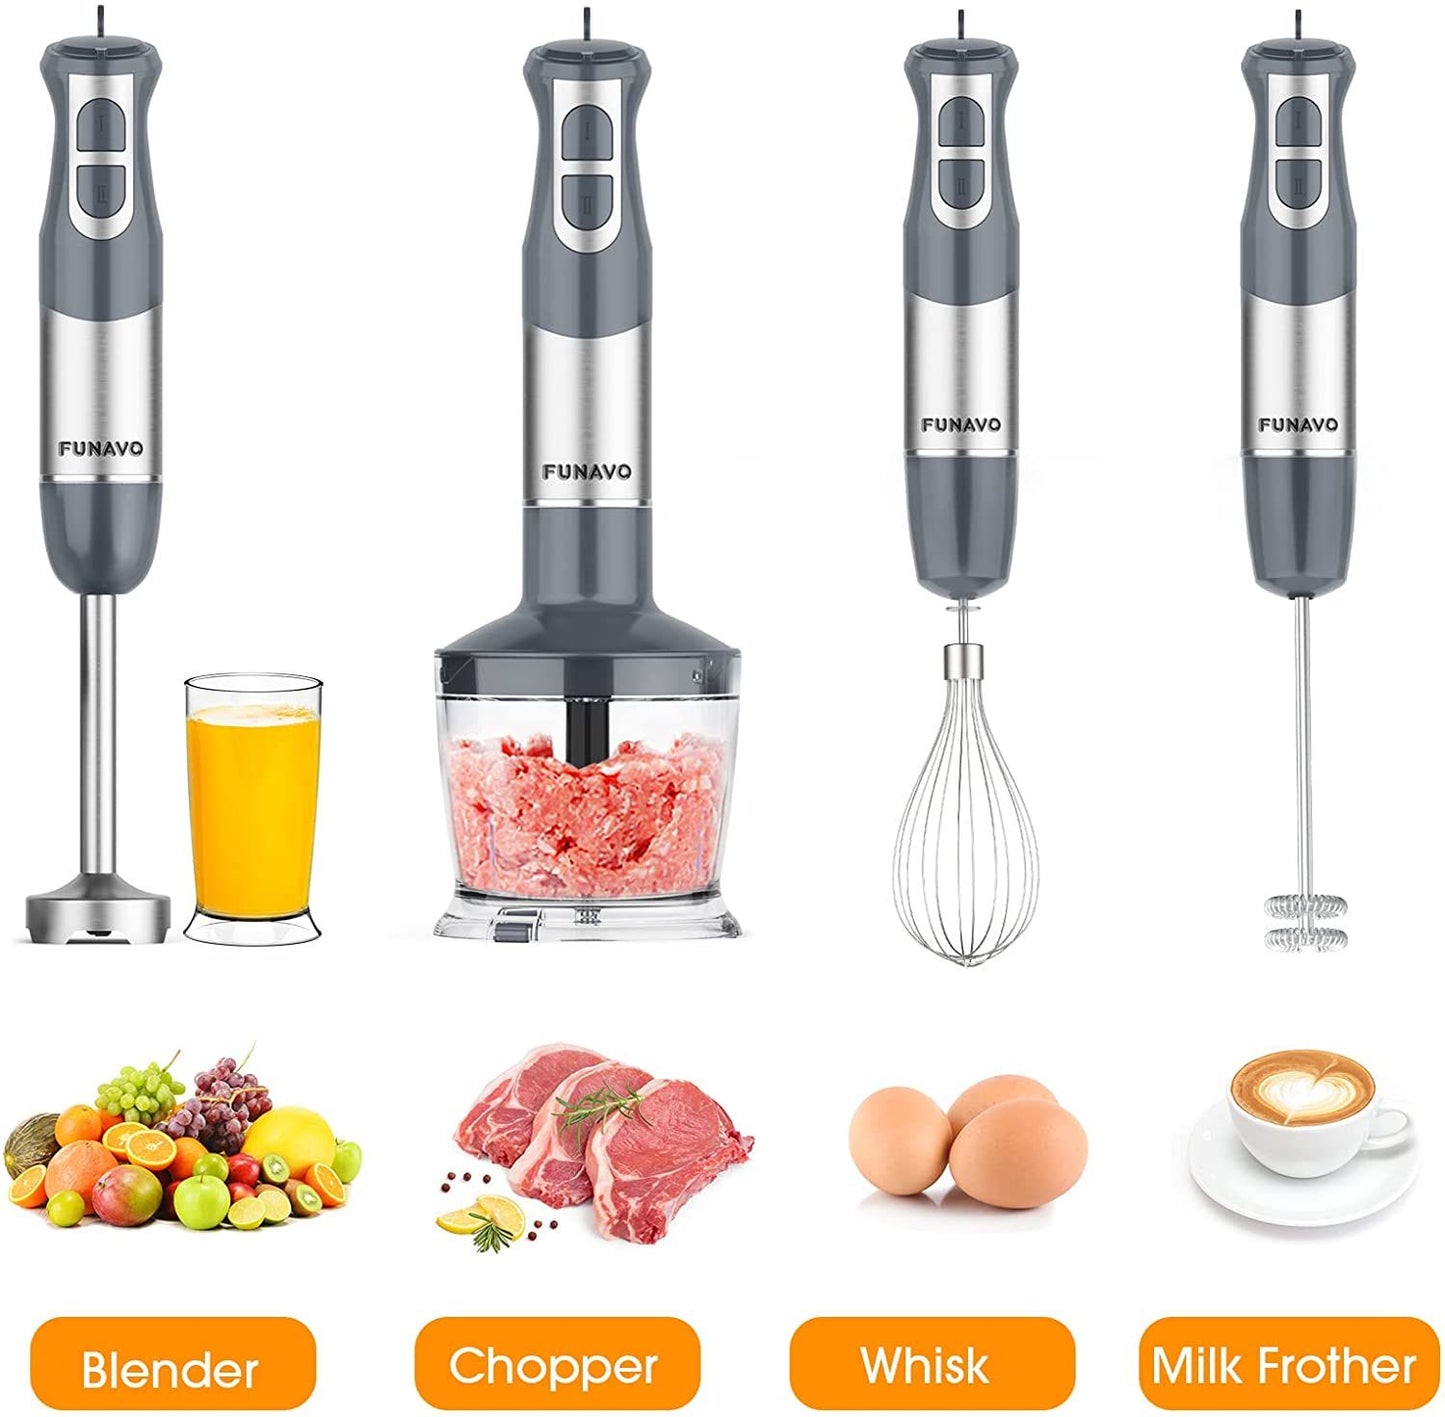 FUNAVO 5-in-1 Multi-Function 12 Speed 800W Stainless Steel Handheld Stick Blender w/ attachments